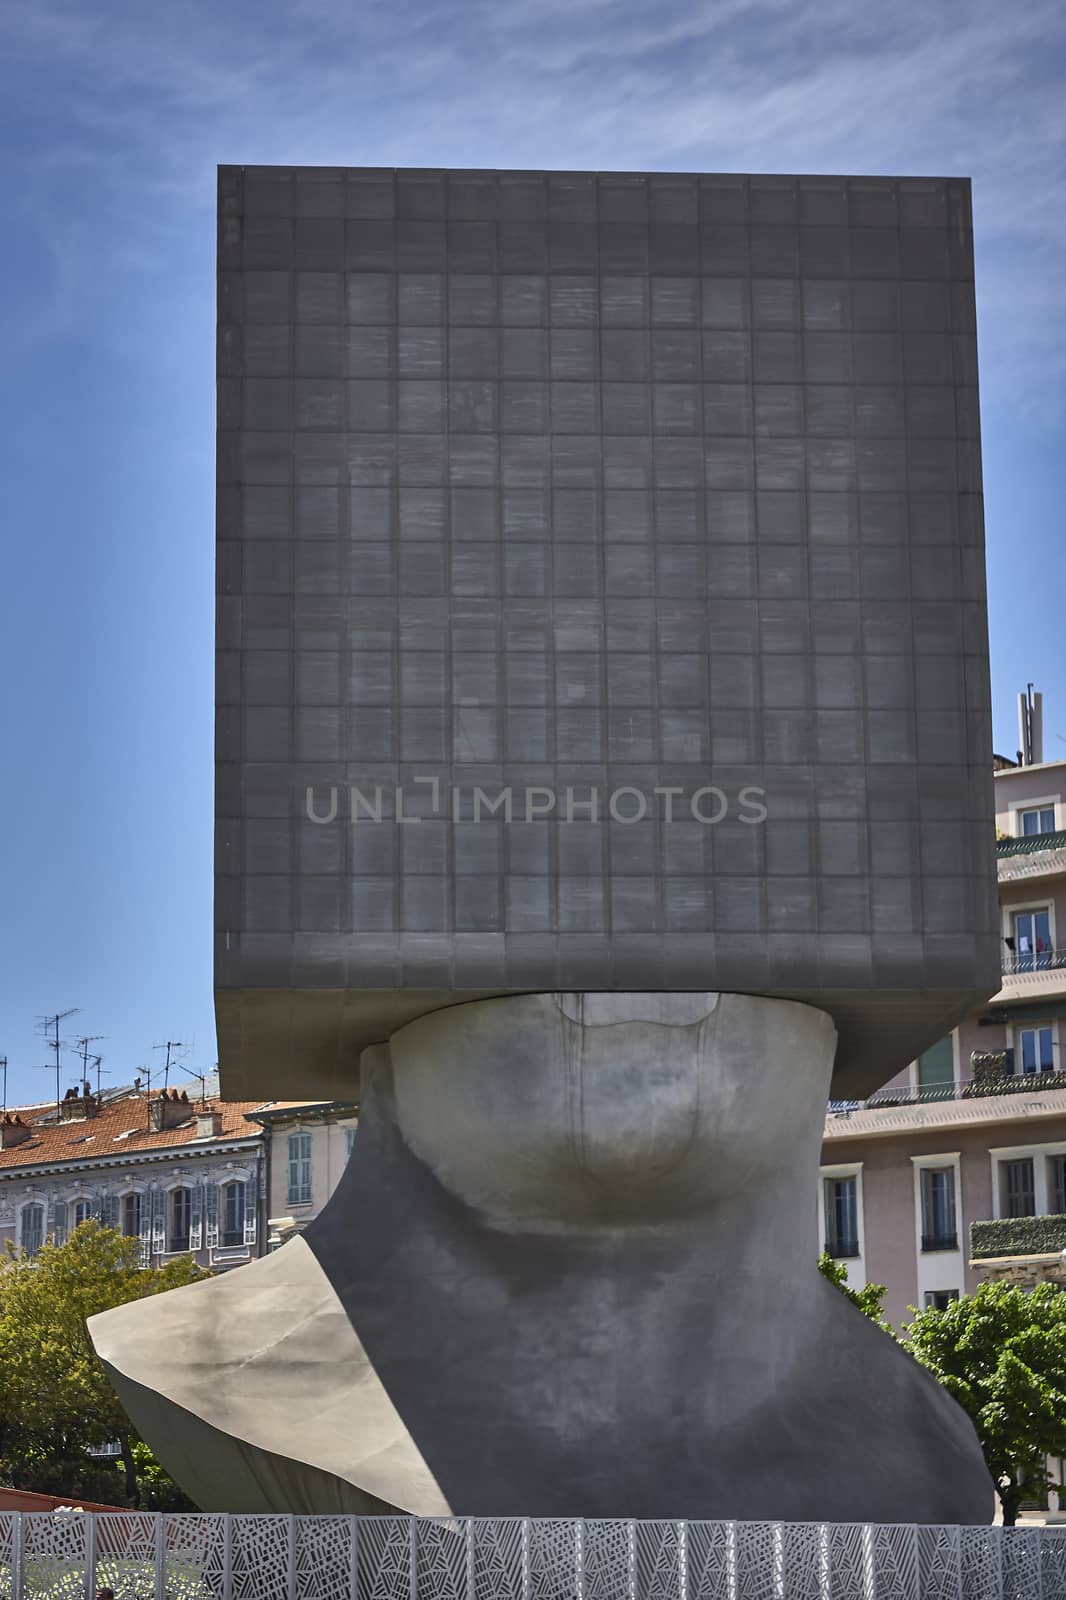 The Tête Carrée: A very characteristic Nizzaa monument: The lower part of a man's head with cube shaped top: seven-story sculpture in the center of the city.